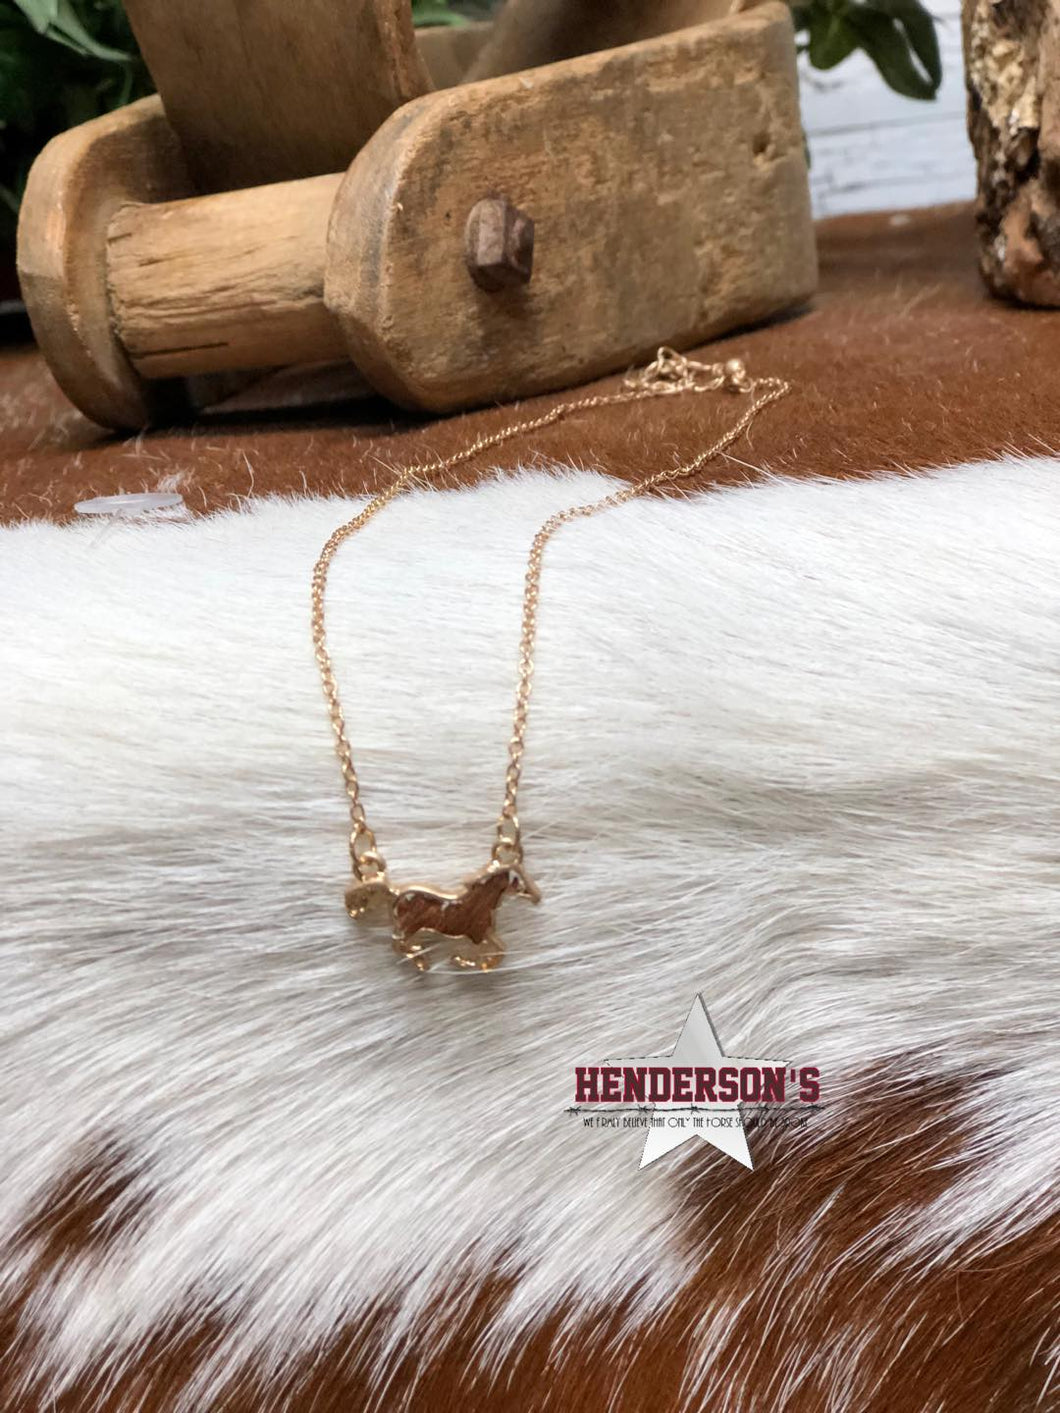 Hair On Horse Necklace - Henderson's Western Store